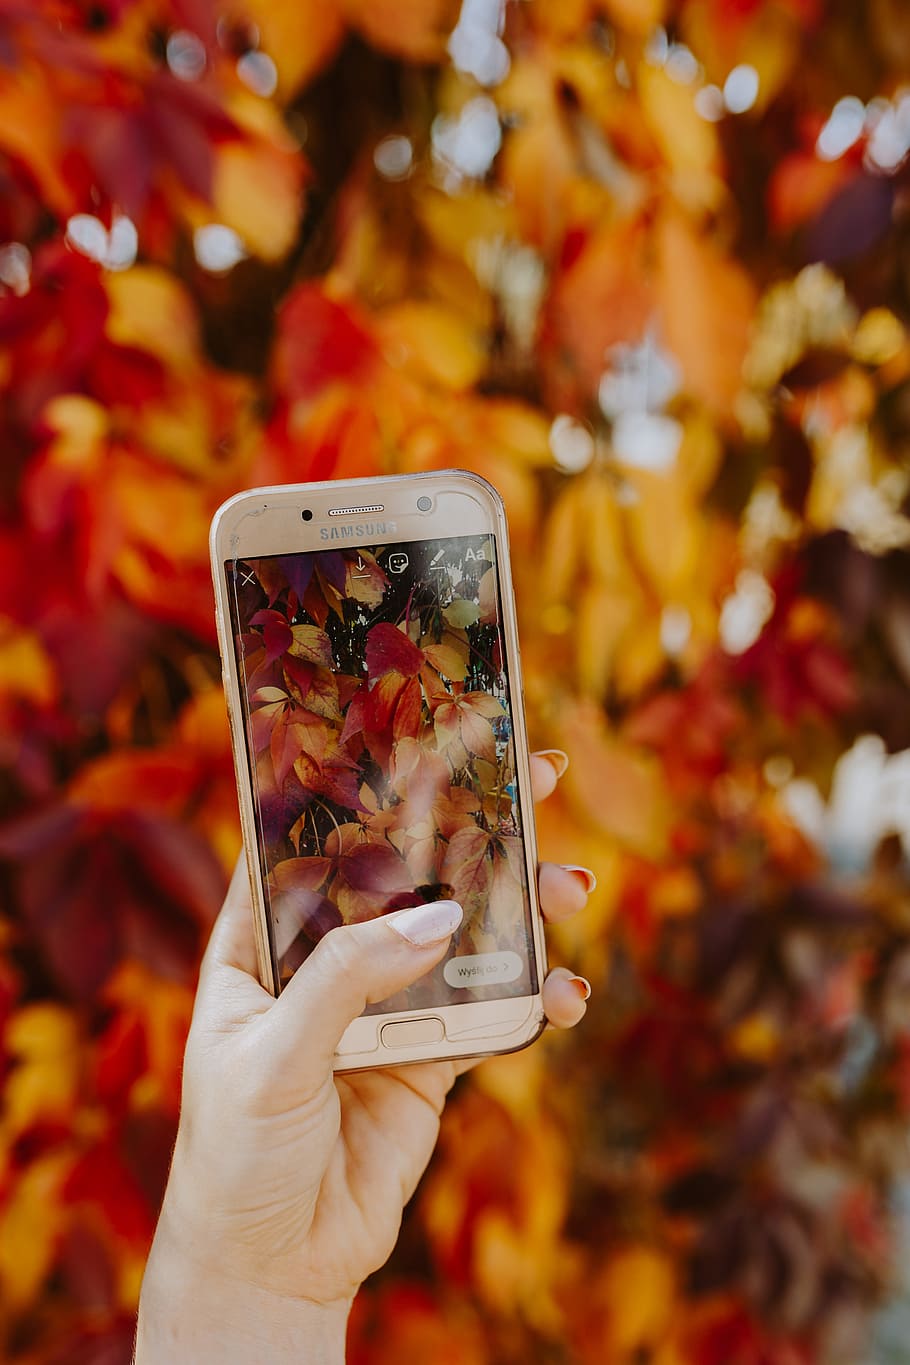 The Woman Takes A Picture Of The Autumn Leaves With - Smartphone - HD Wallpaper 